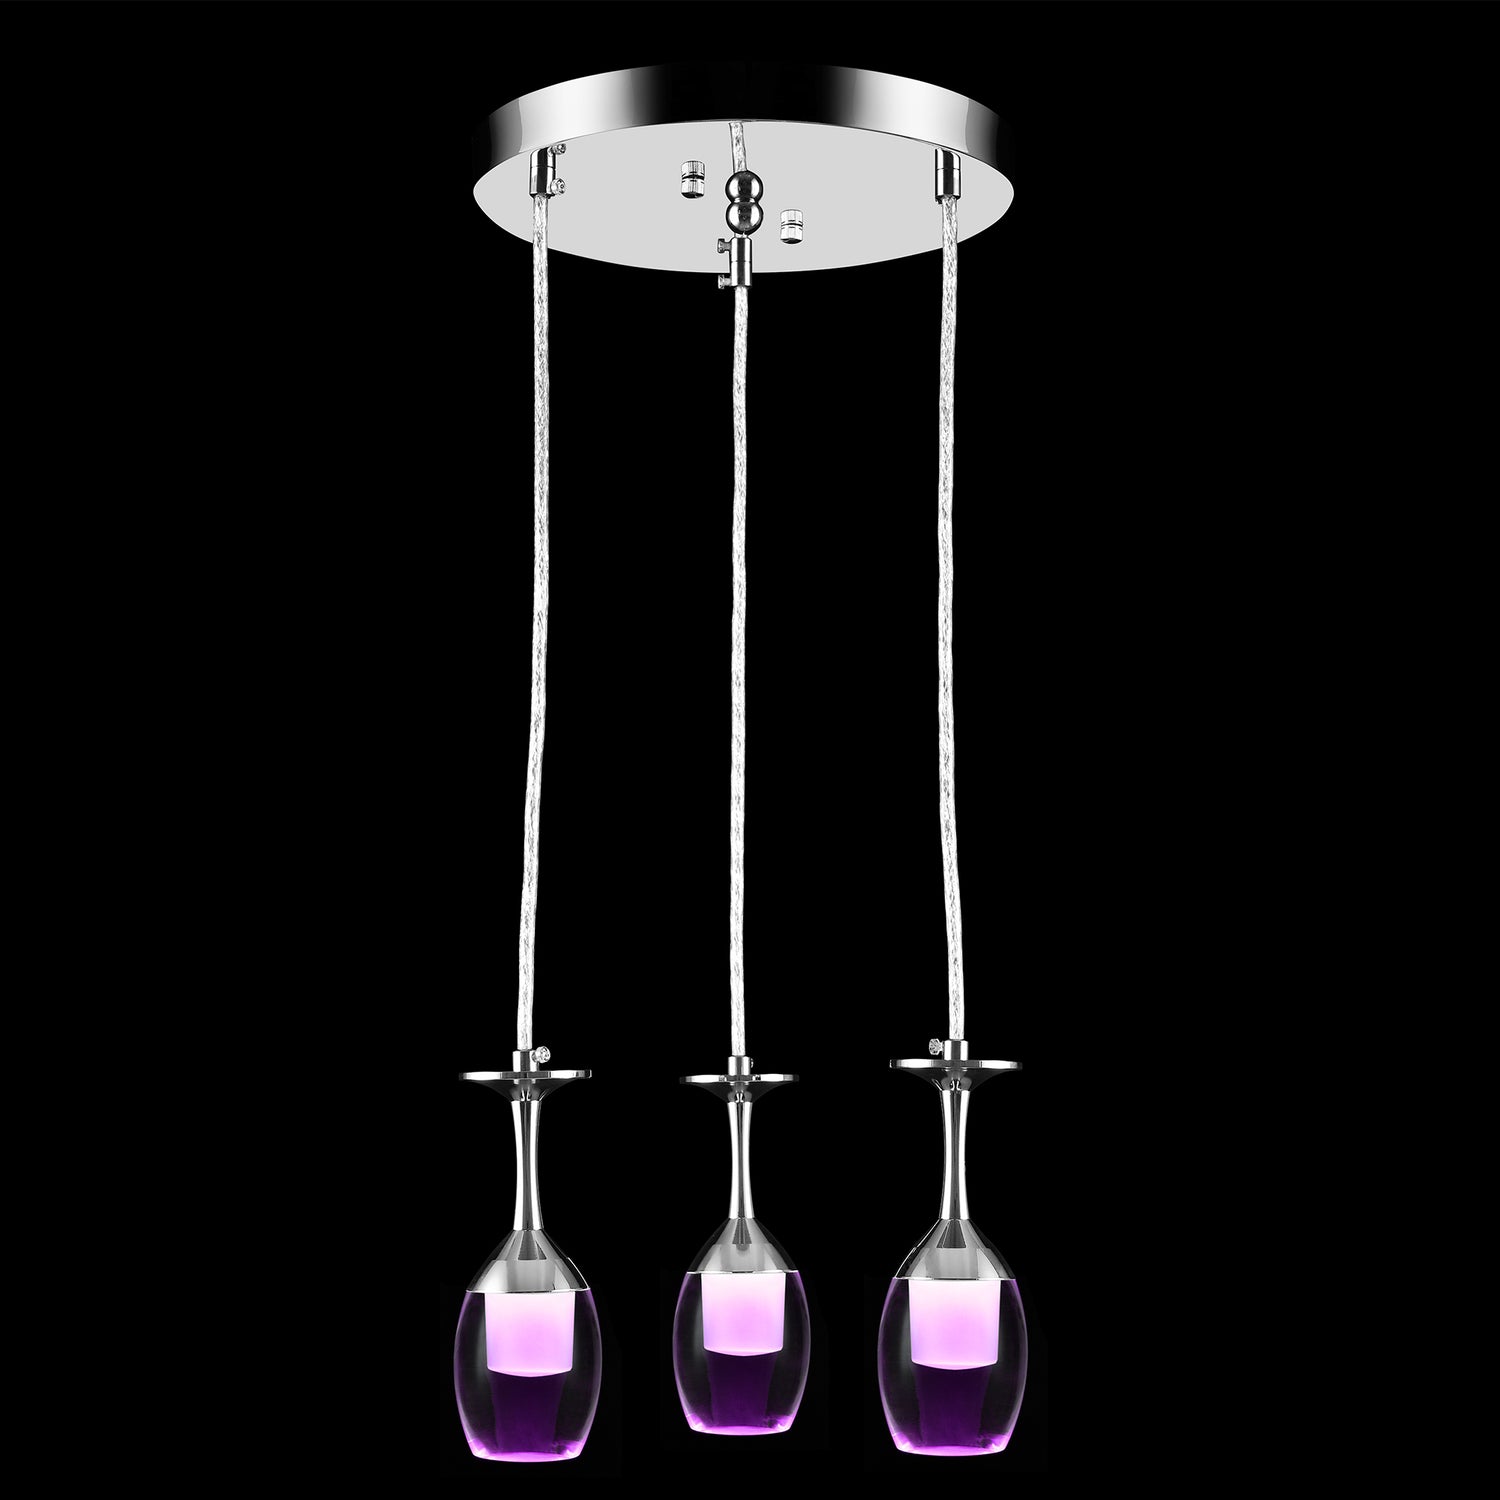 It brings fun light that can be used in every occasion. The pendant light features Wi-Fi apps, Siri Shortcut and Voice control technology (compatible with Amazon Alexa and Google Home Assistant) to set the pendant light dimmable and RGB multicolor. This pendant light can satisfy not only the various color lighting effect settings, but also the more dim color variations that slowly change. The light colors are vivid and bright and dimmable. 